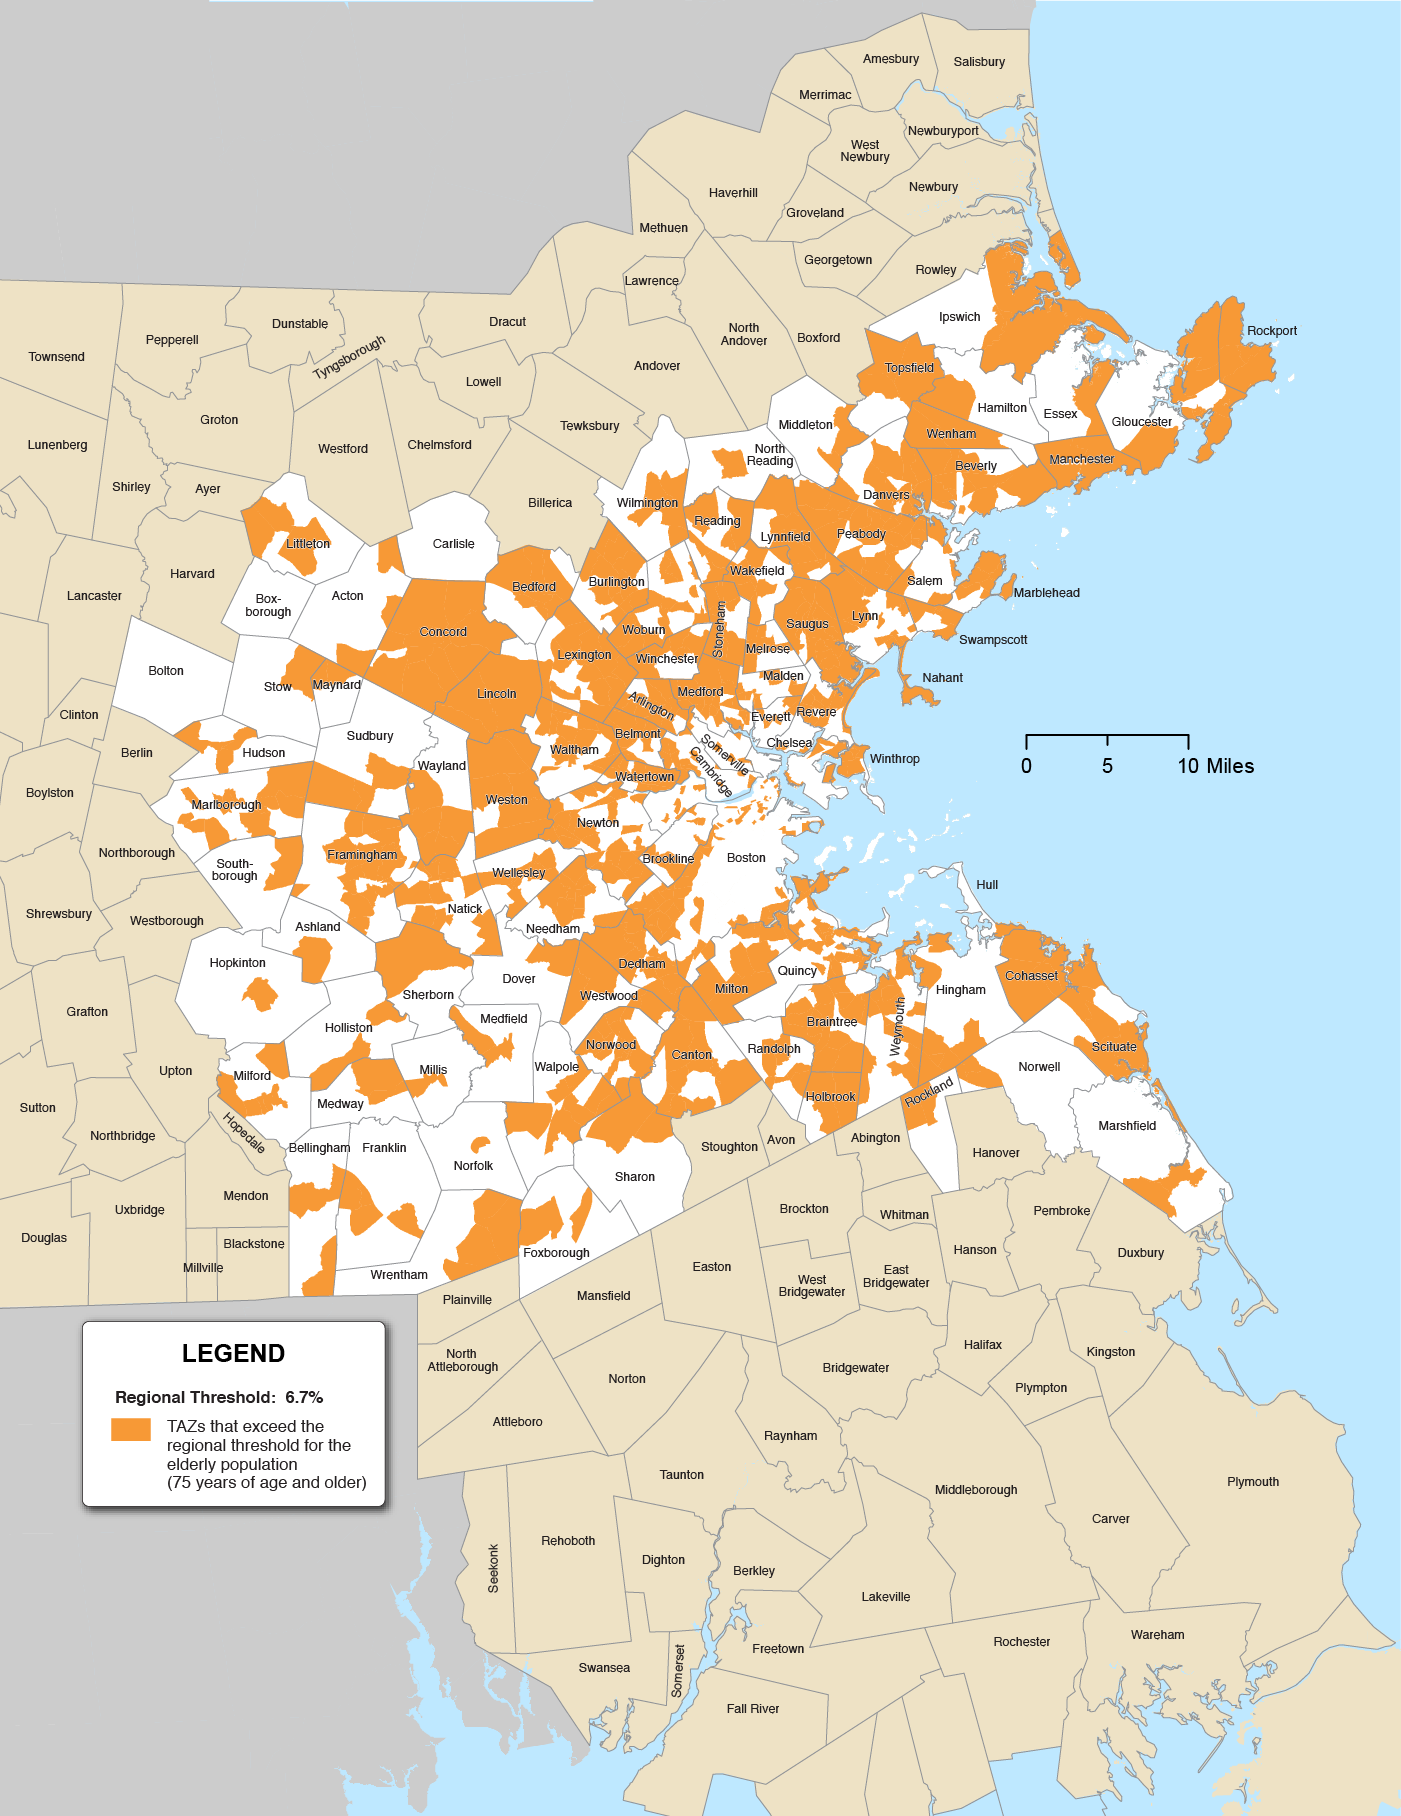 Figure 8-5 is a map of the Boston Region municipalities and the TAZs that exceed the regional threshold for people 75 years of age and older highlighted in orange. The Regional Threshold is 6.7%